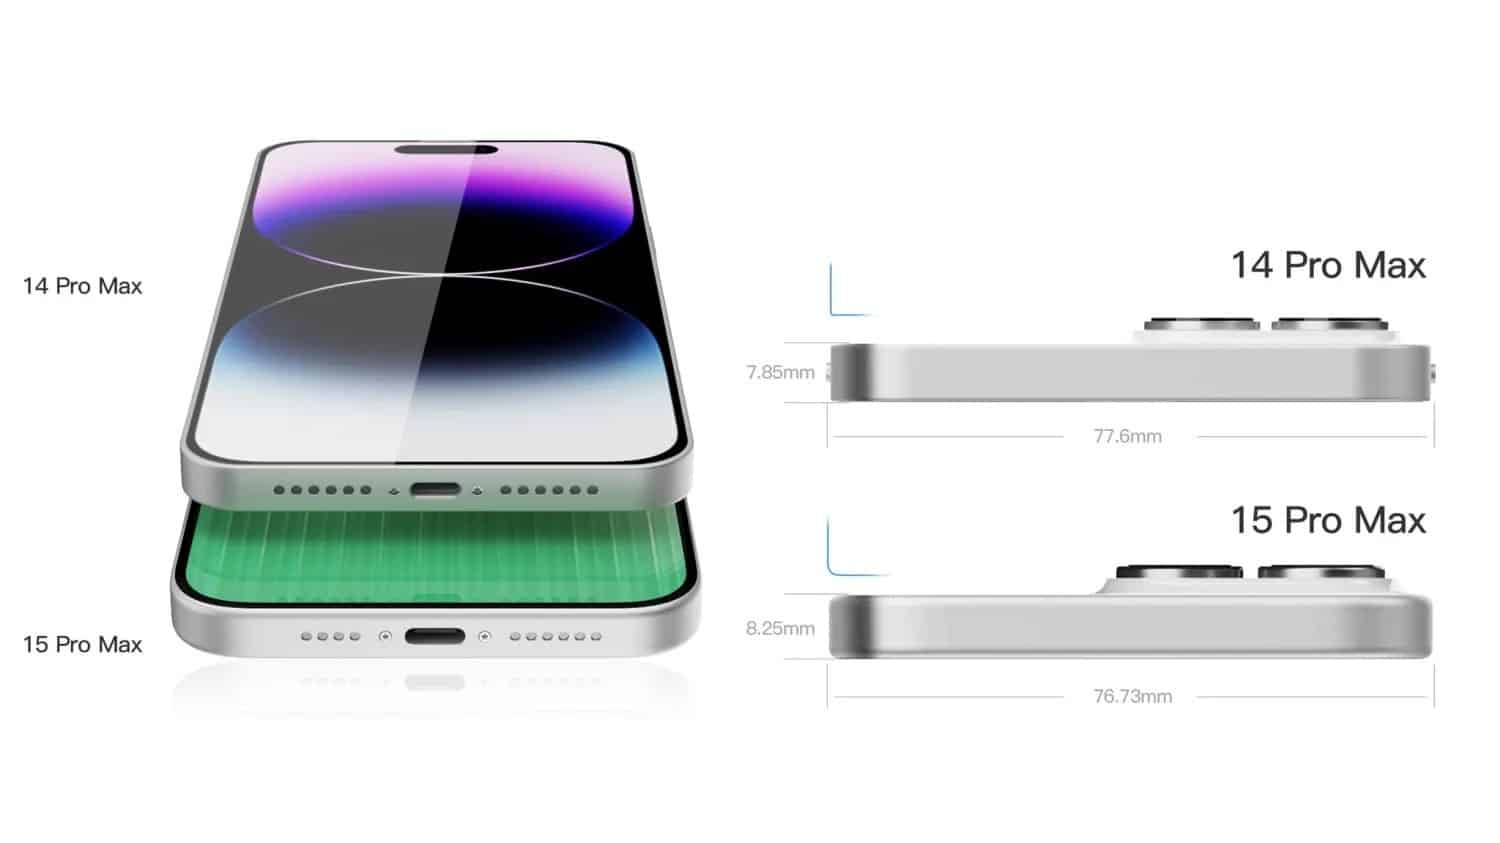 Rumours About the iPhone 15 Pro Max’s New Features